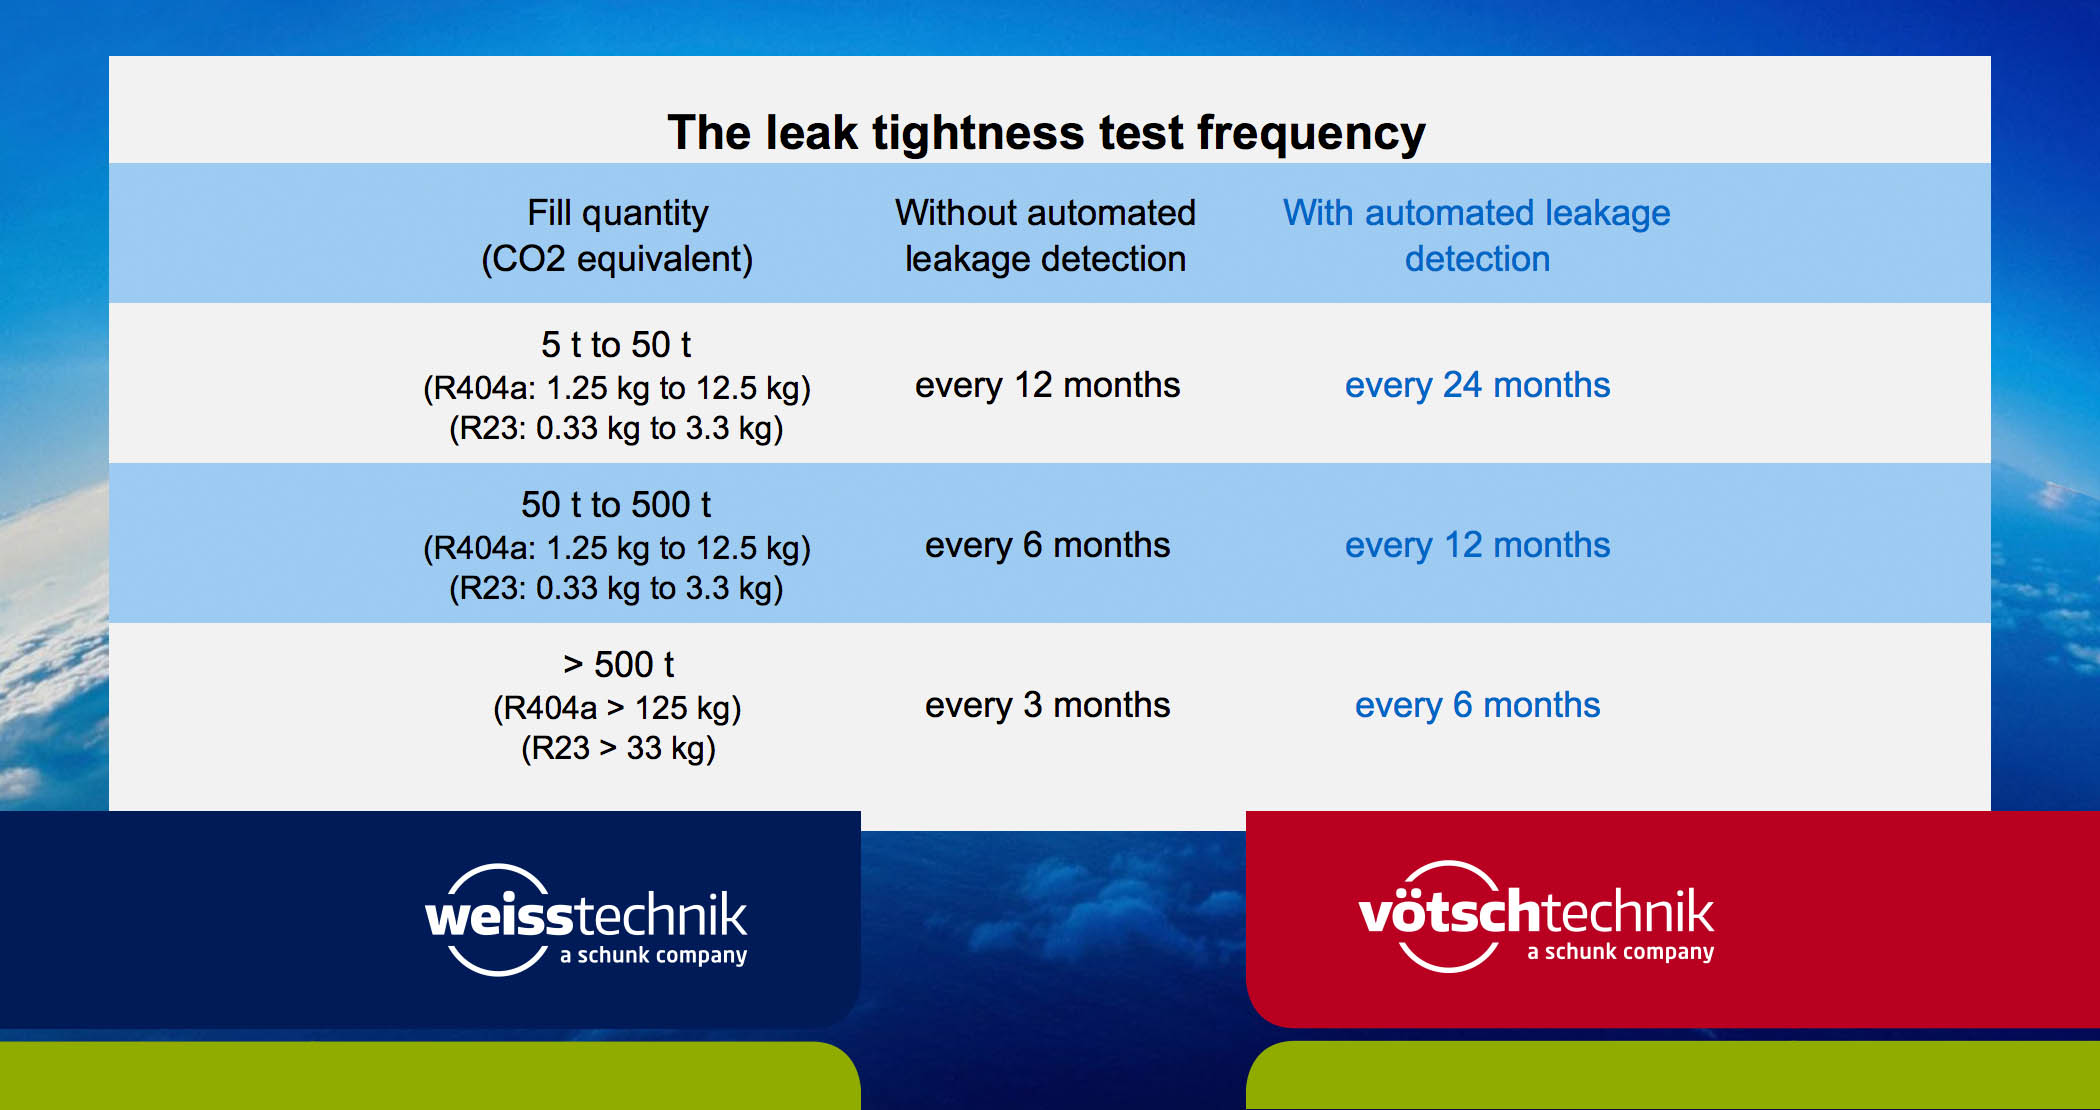 The leak tightness test frequency